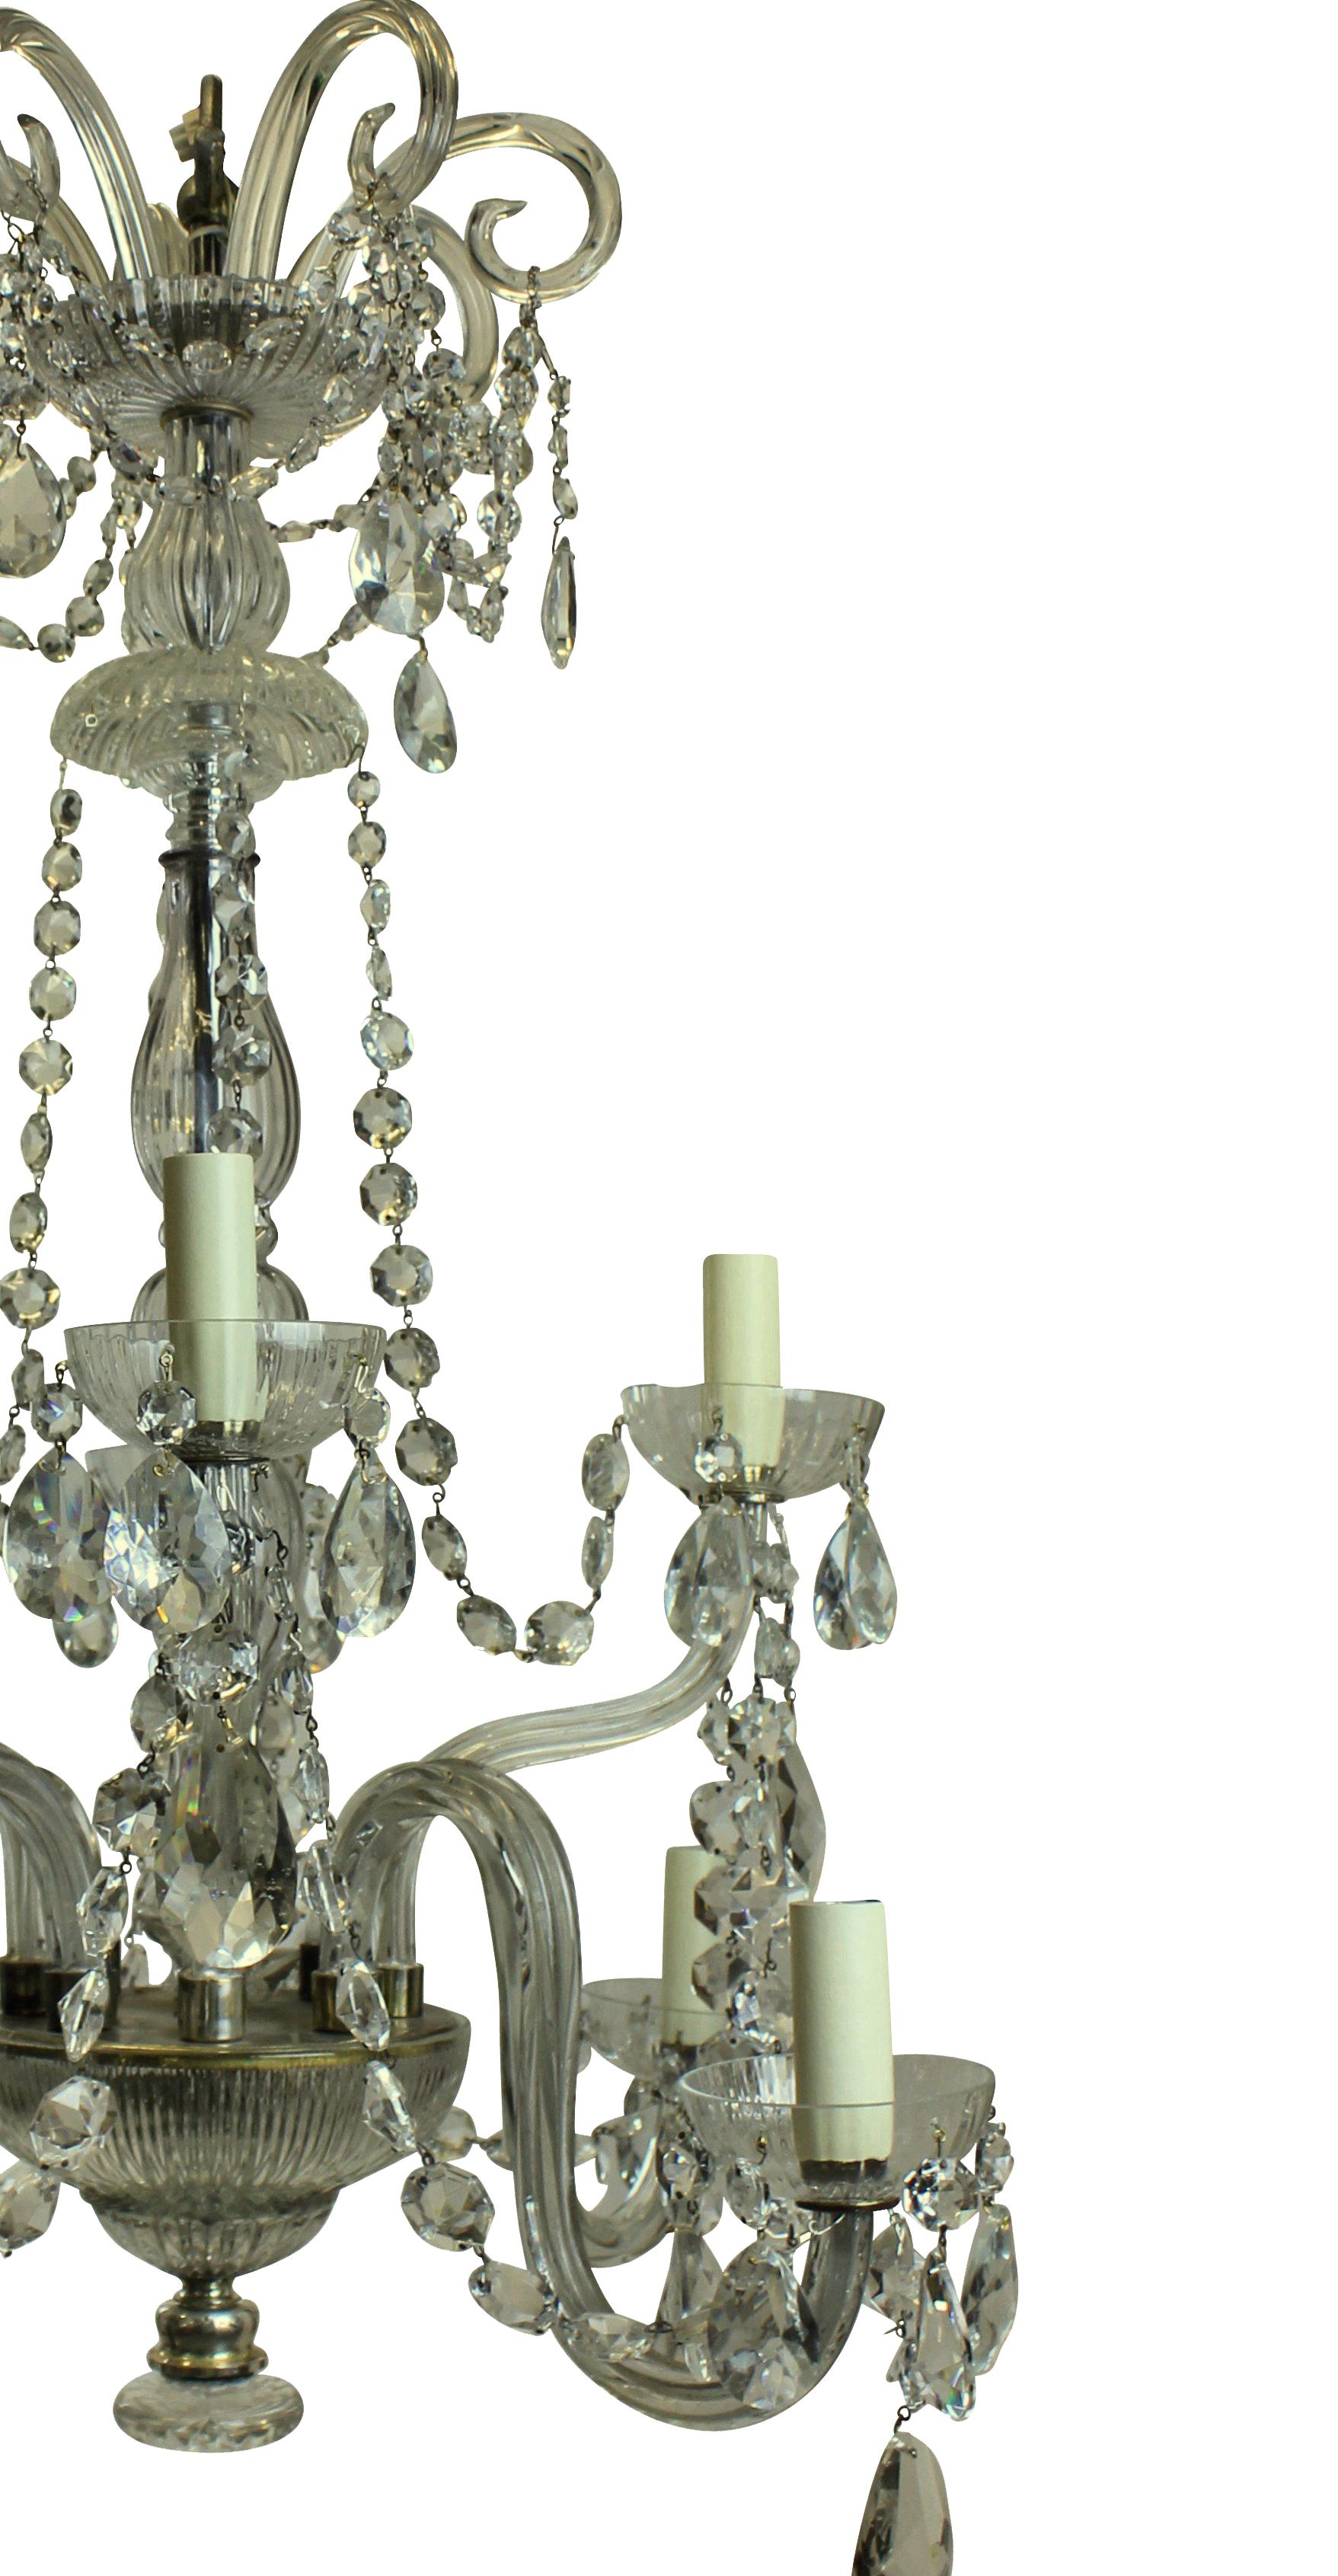 A French cut-glass chandelier of good proportions, with scrolls and swags.